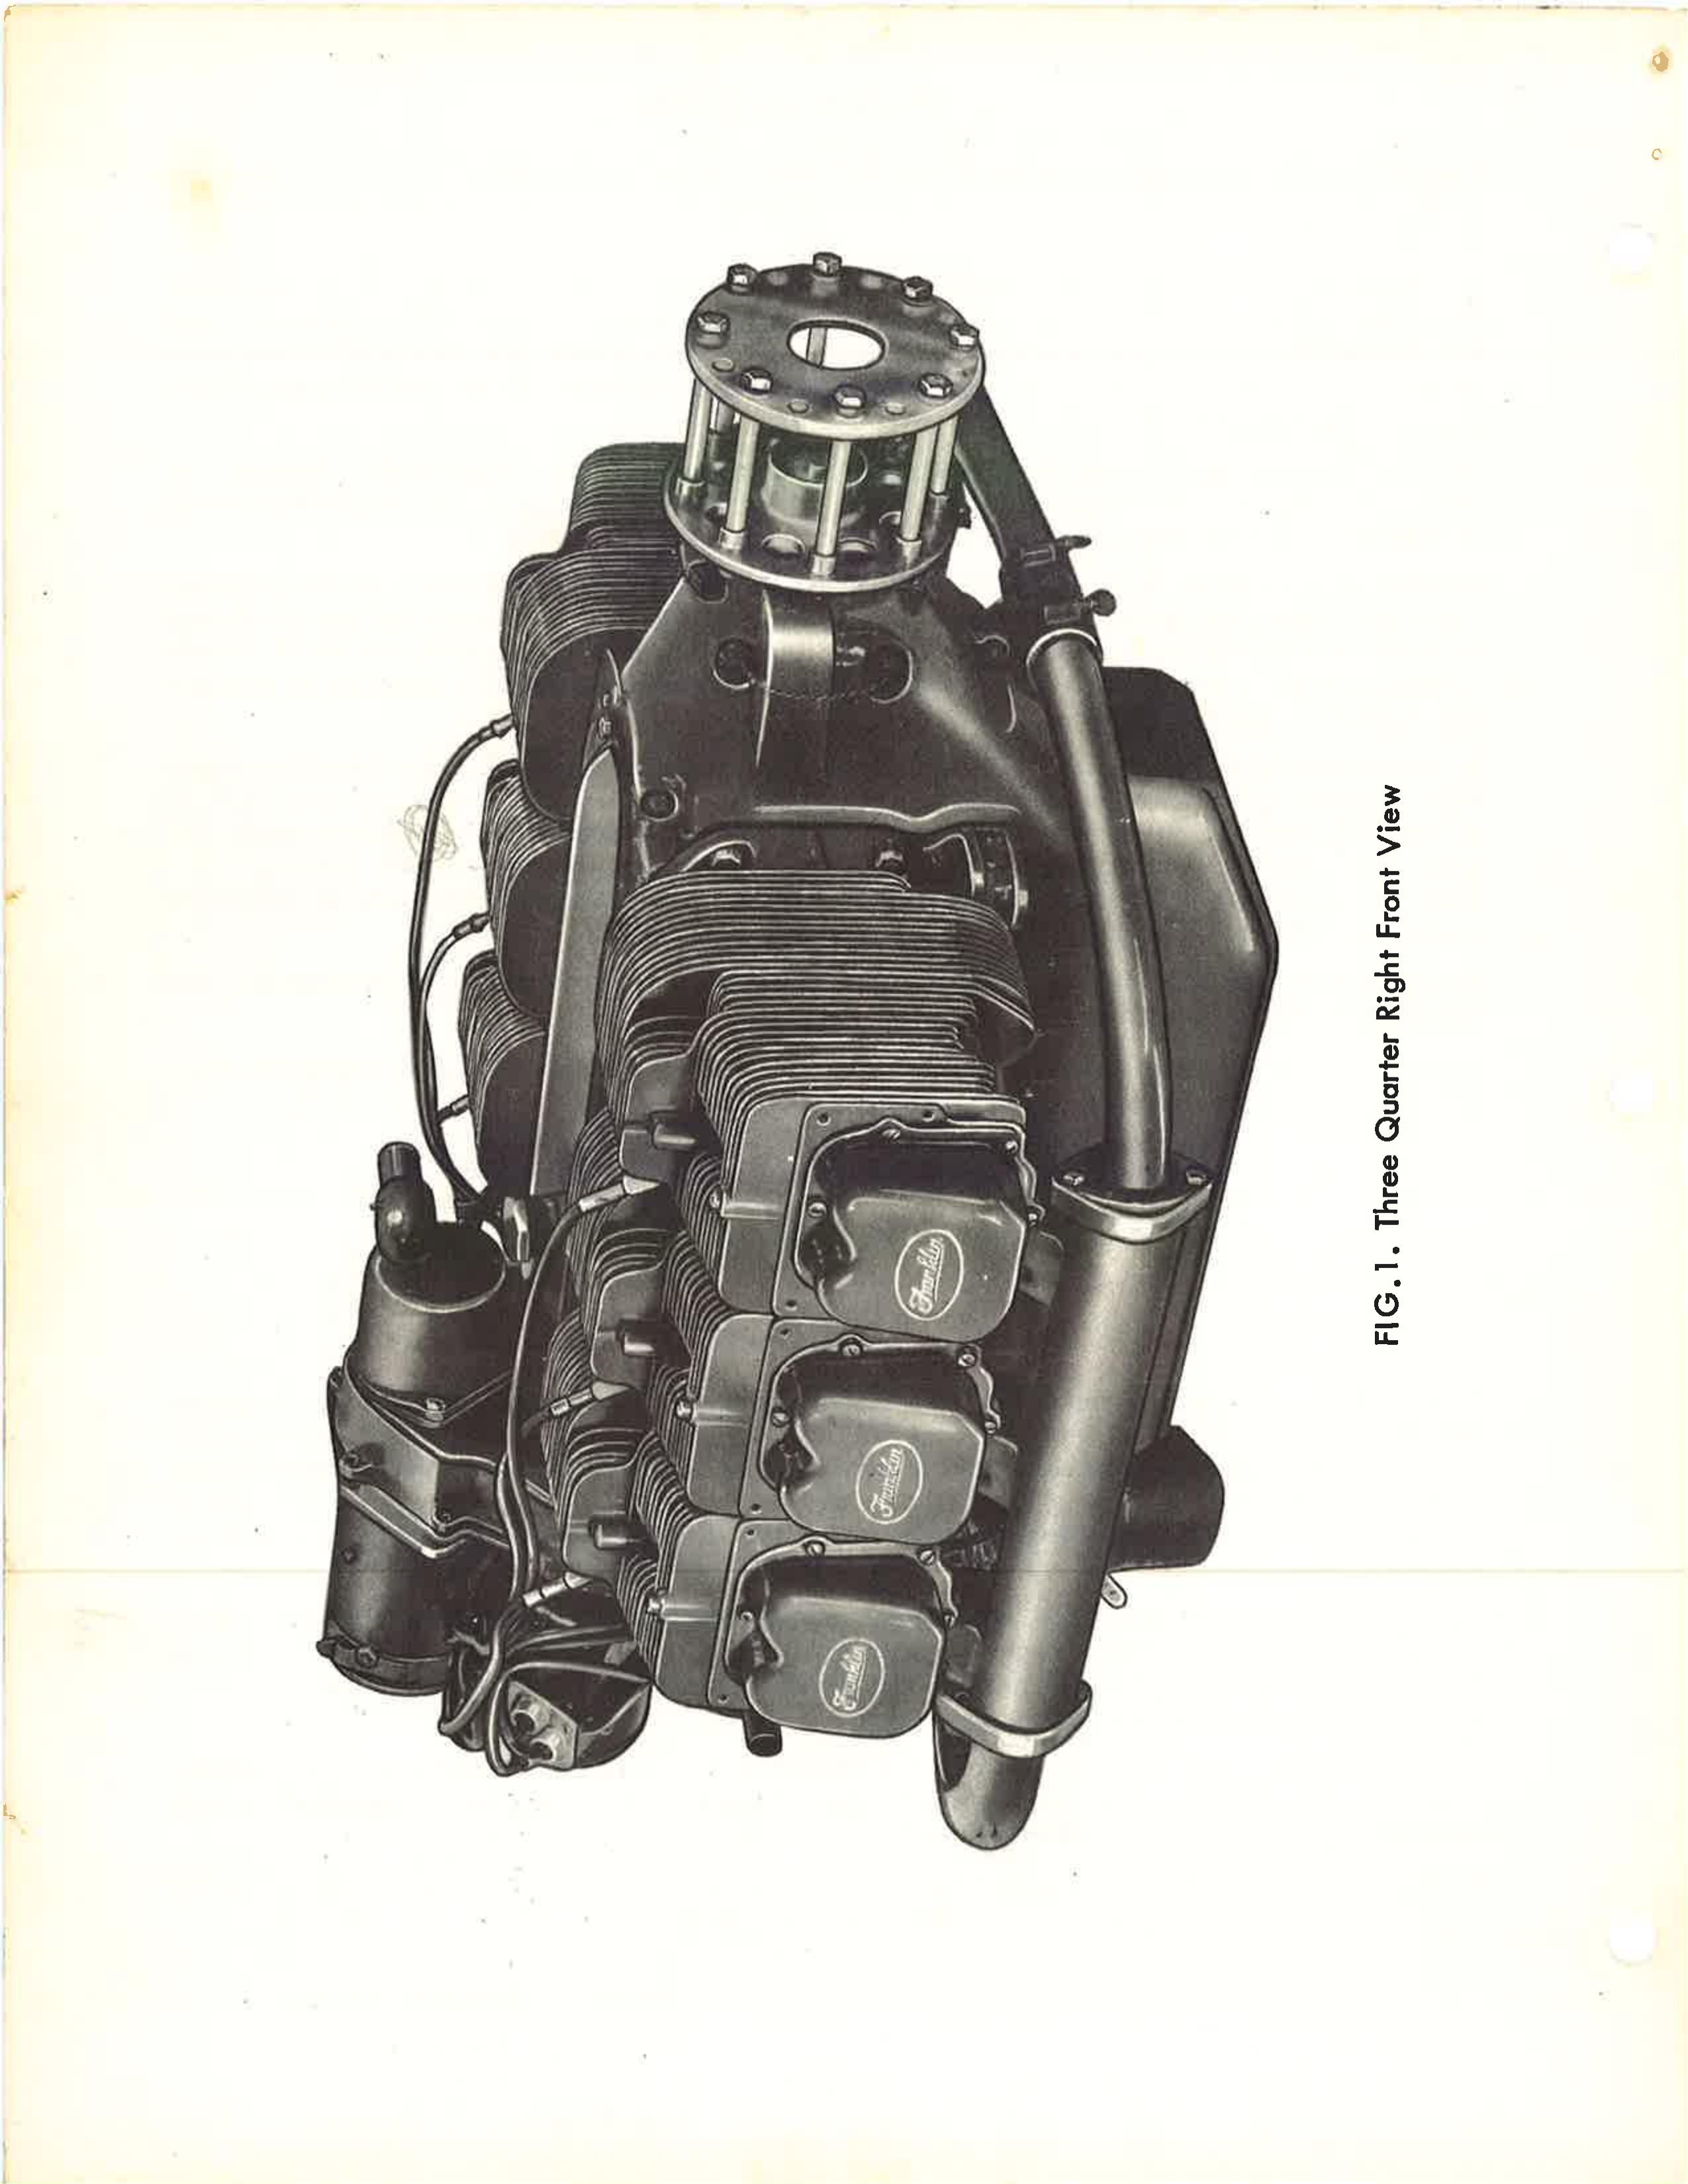 Sample page 7 from AirCorps Library document: Service Manual for Engine Models 6A4-150-B3 and 6A4-165-B3